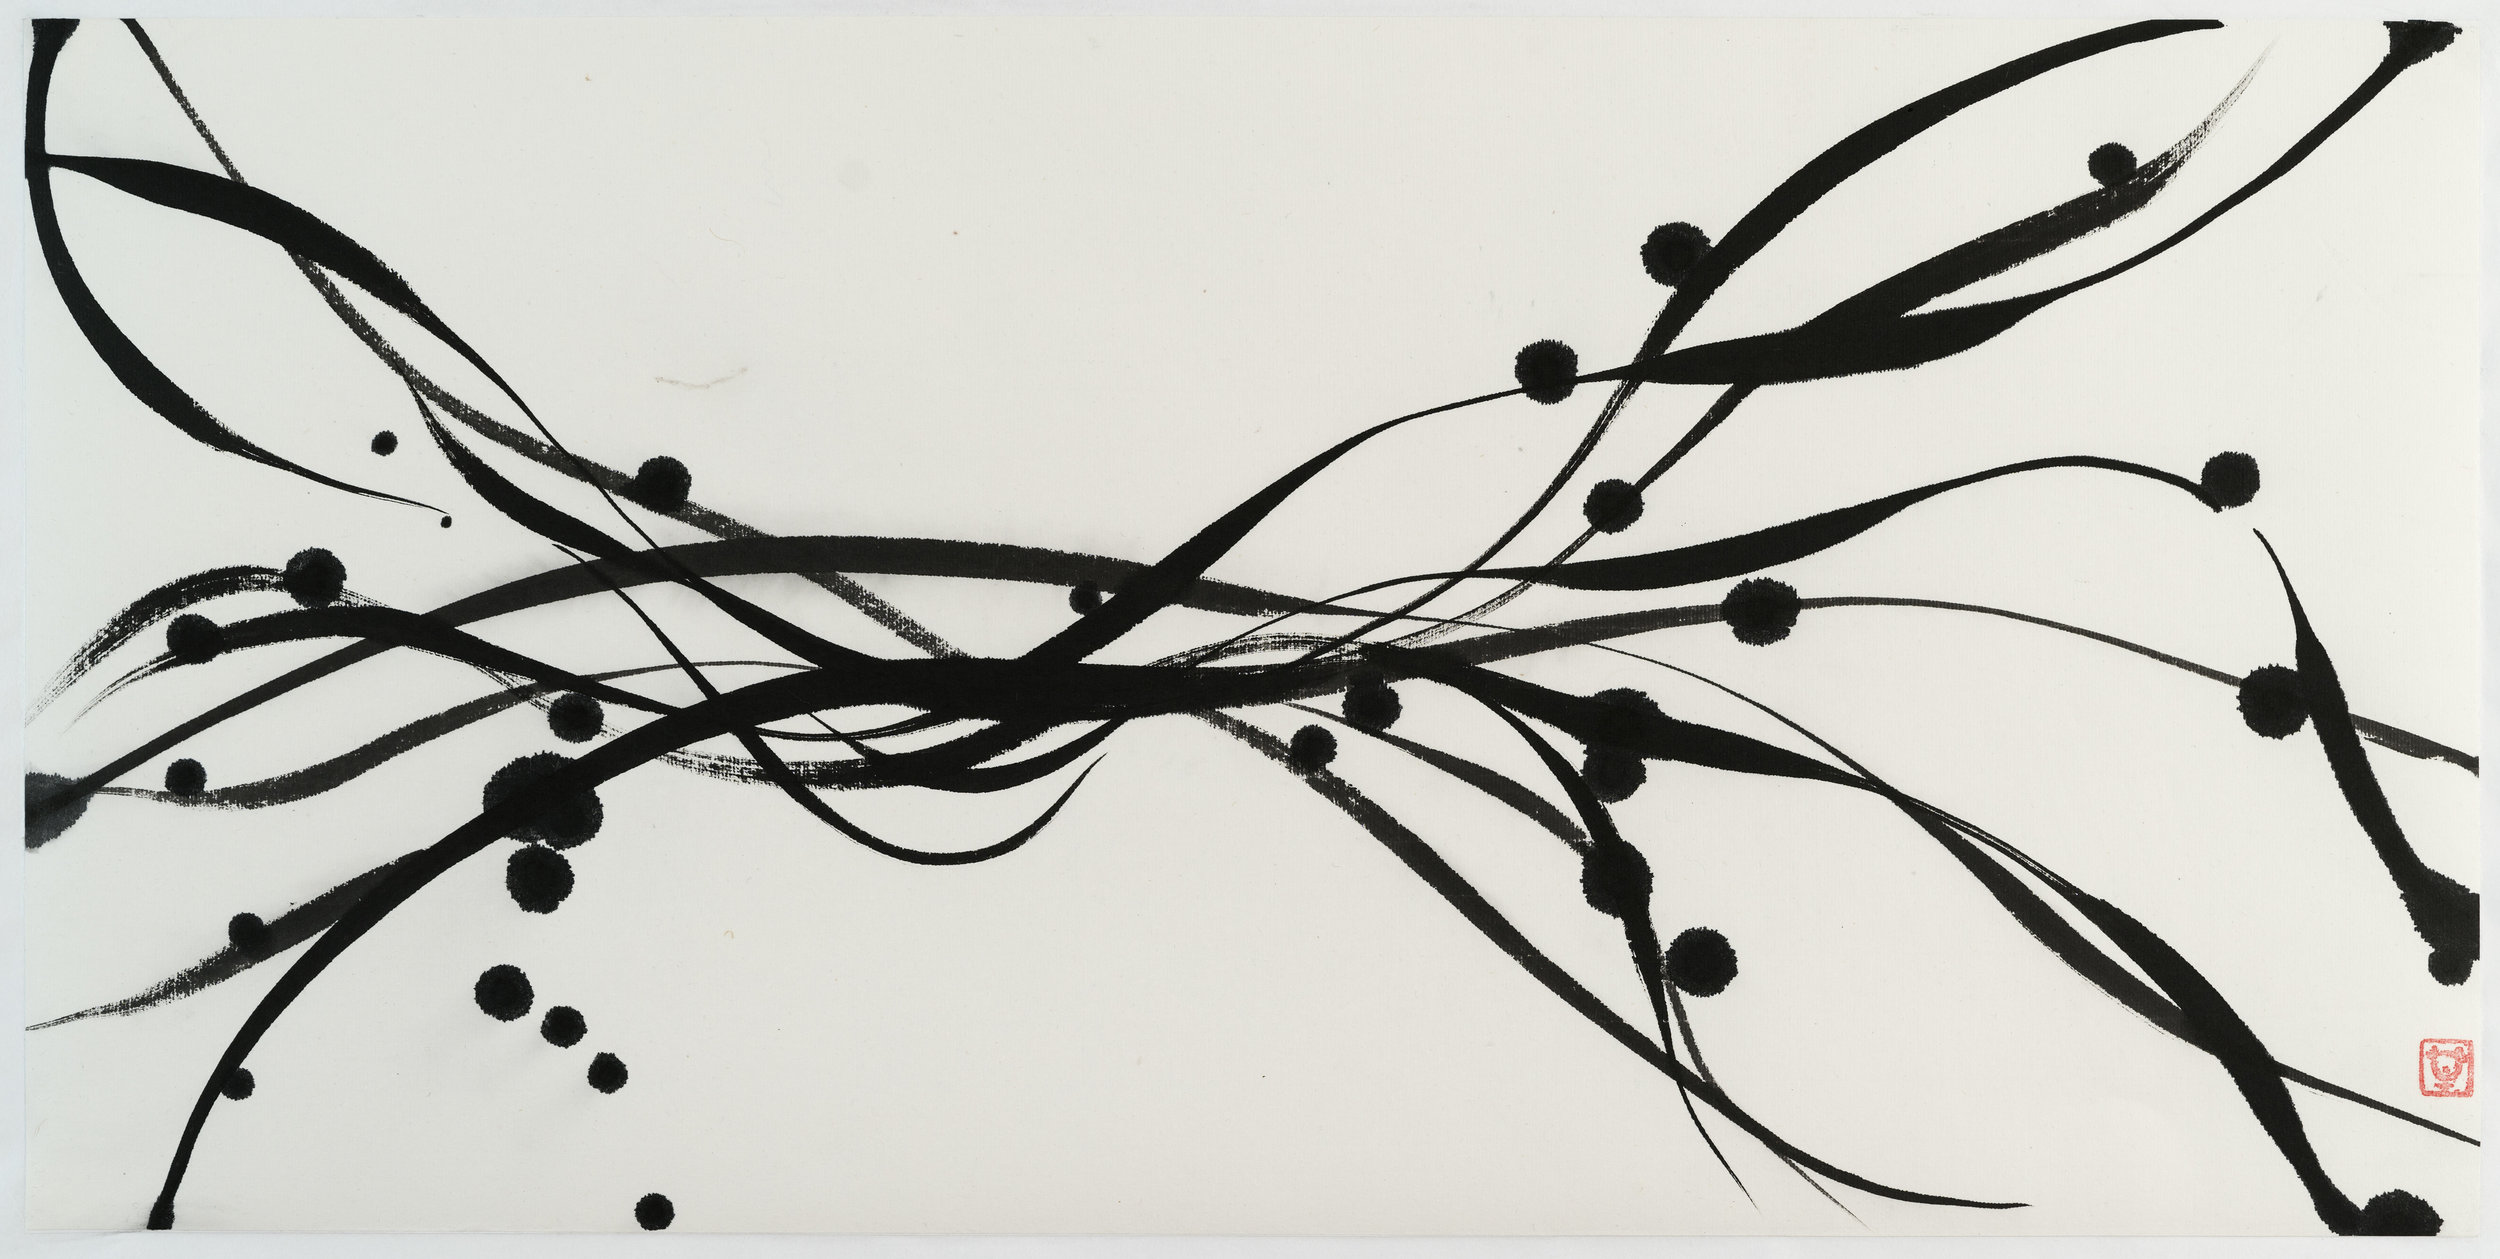  13.5" x 27", sumi ink on paper, $1260.  XPR270    